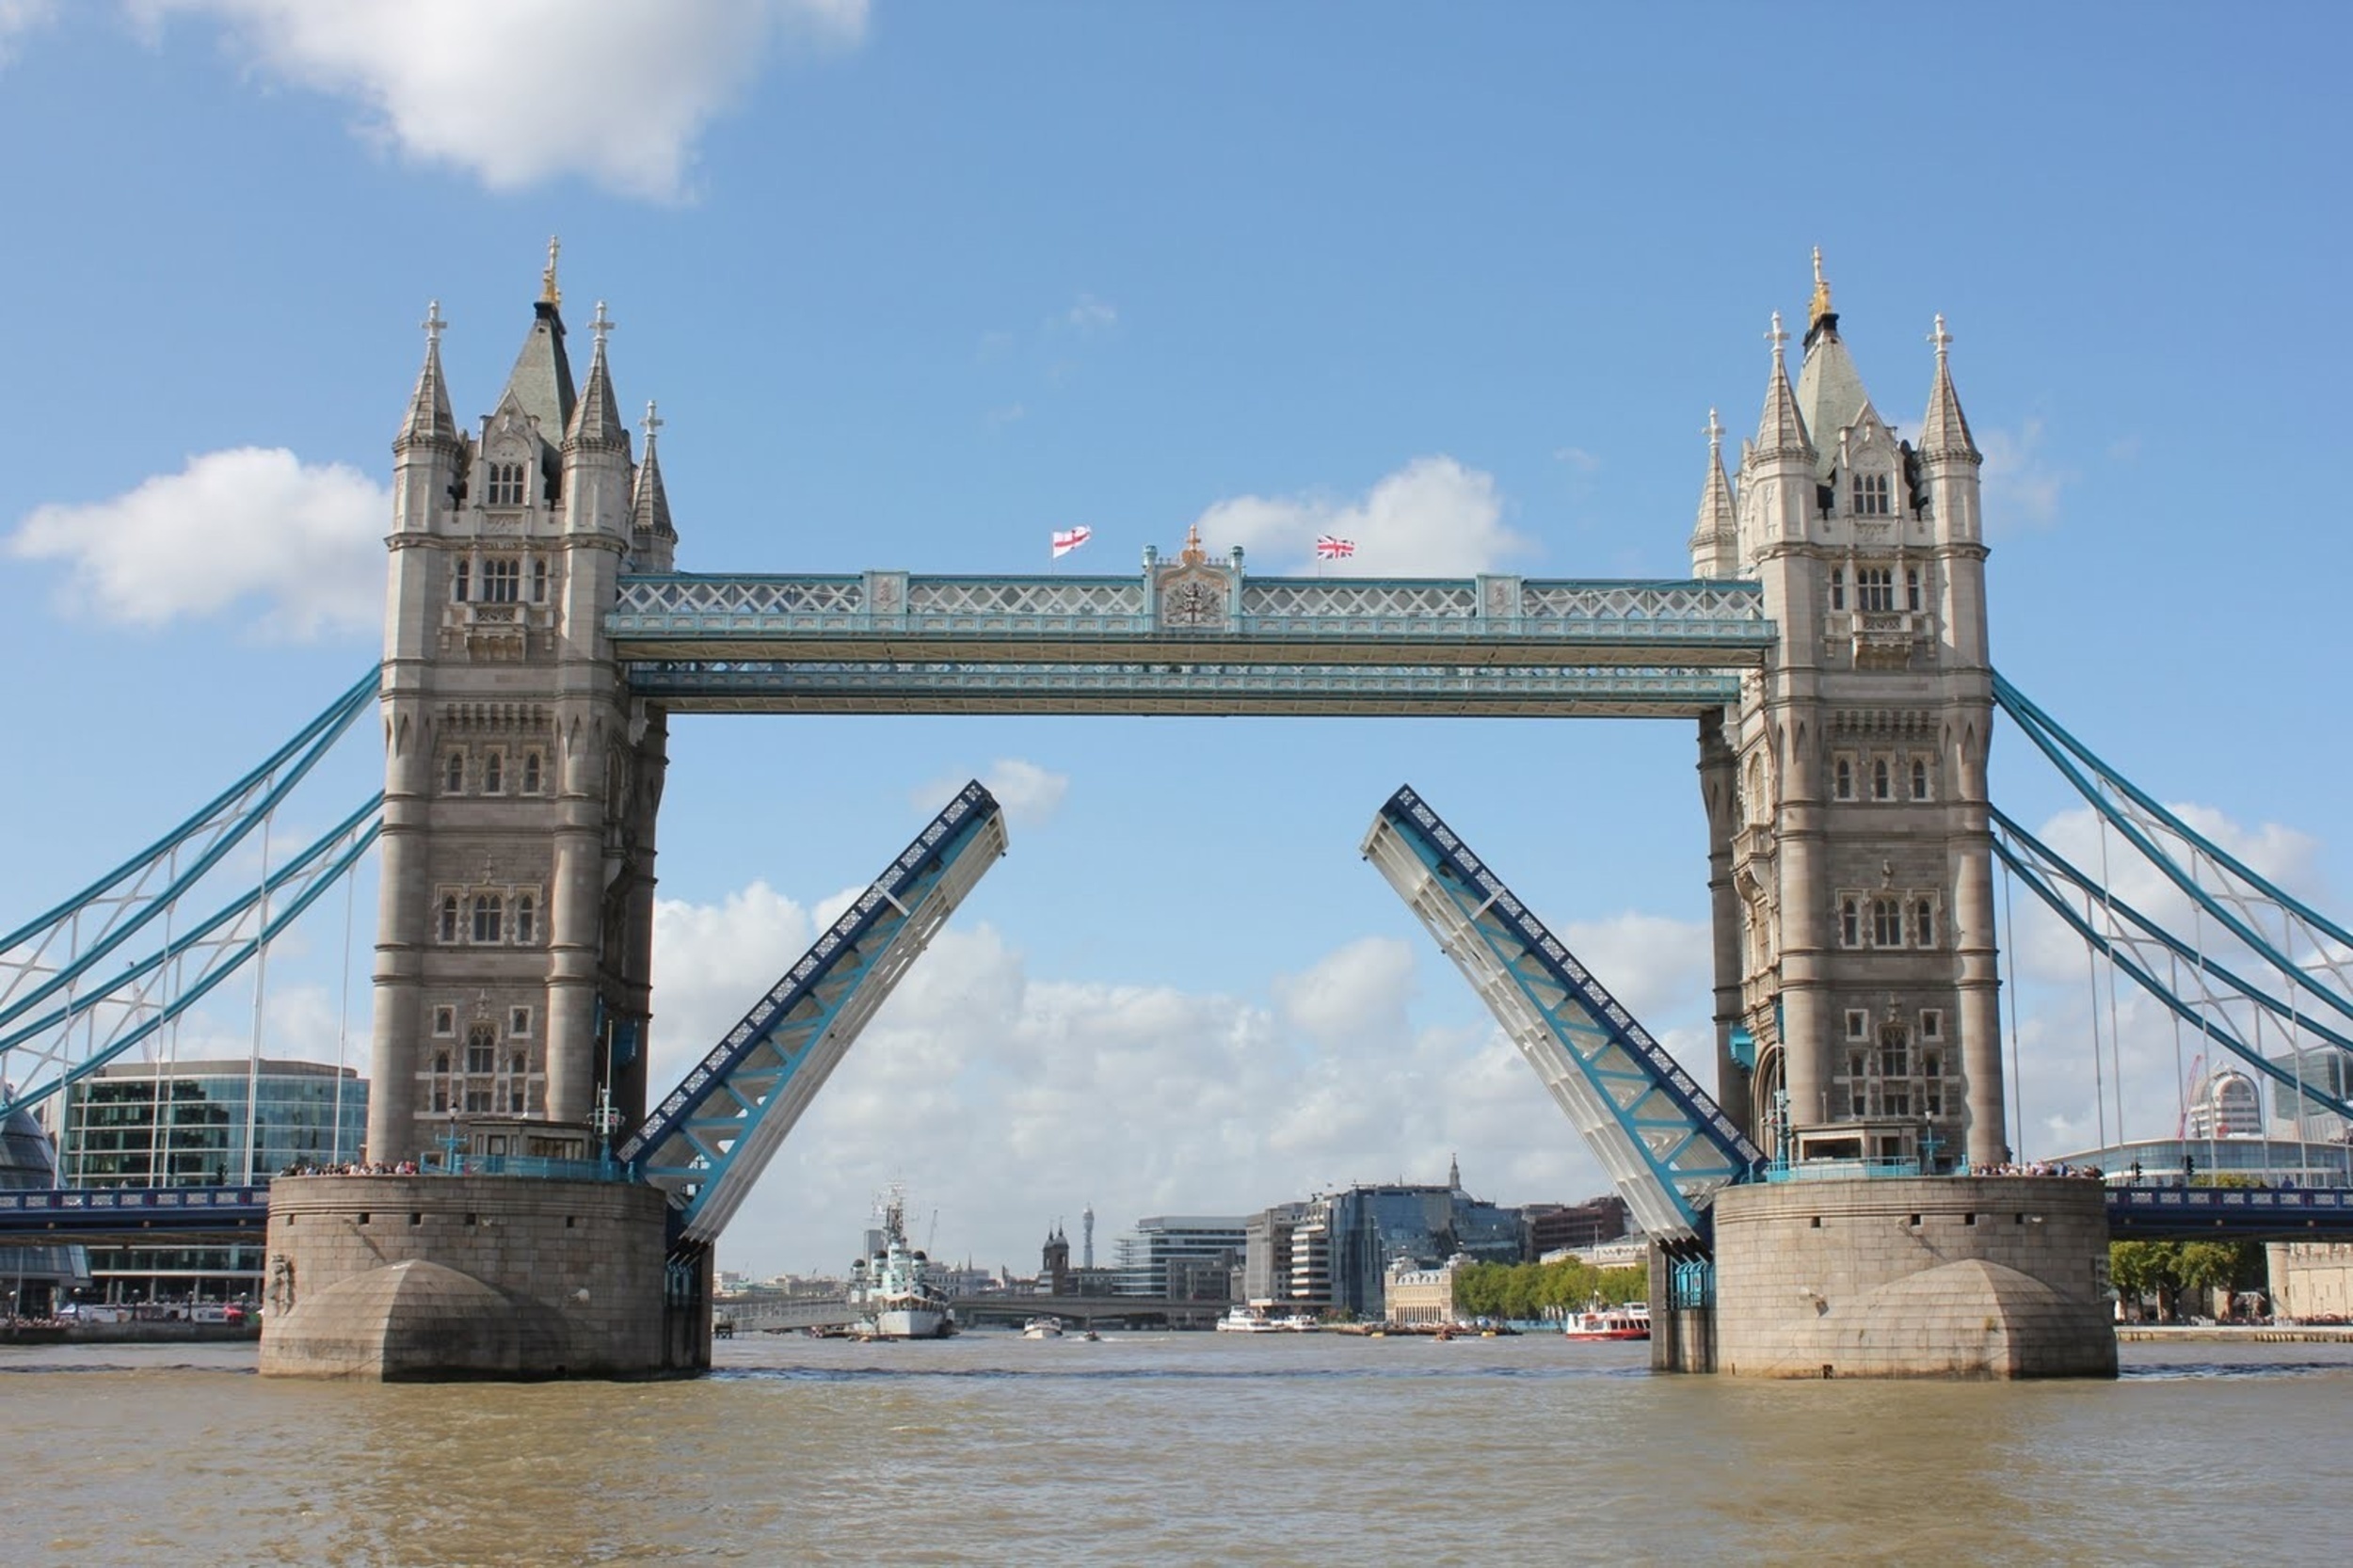 <p>You can see the Tower Bridge from miles away. It's one of London's massive spots, so much so that if you miss it, you won't really have seen London at all. </p><p><a href='https://www.msn.com/en-us/community/channel/vid-cj9pqbr0vn9in2b6ddcd8sfgpfq6x6utp44fssrv6mc2gtybw0us'>Follow us on MSN to see more of our exclusive lifestyle content.</a></p>